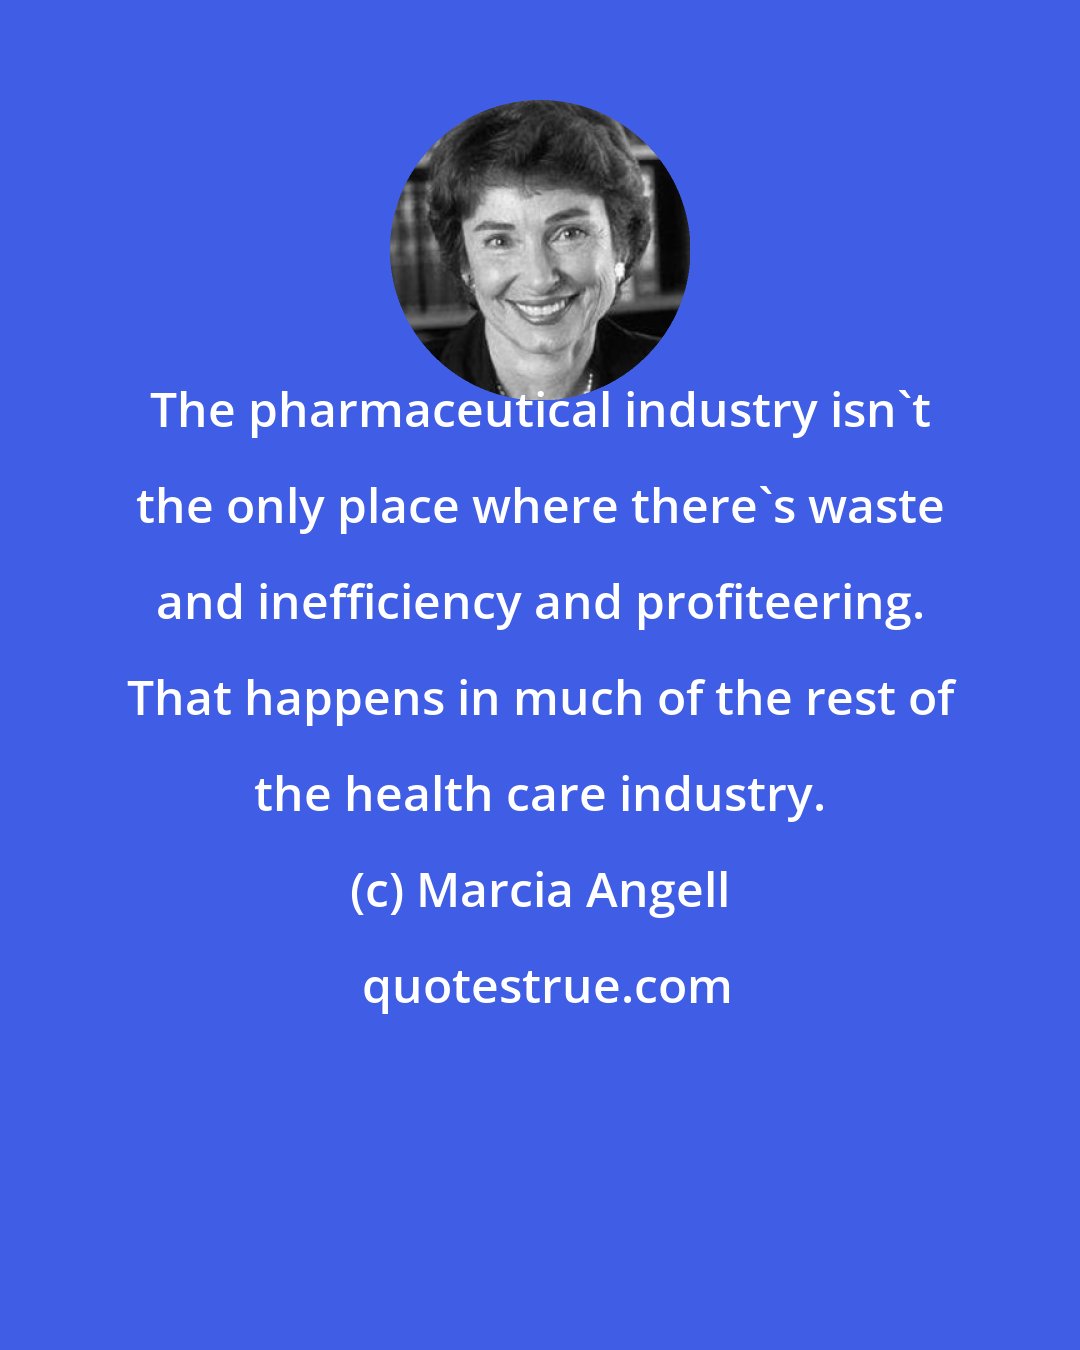 Marcia Angell: The pharmaceutical industry isn't the only place where there's waste and inefficiency and profiteering. That happens in much of the rest of the health care industry.